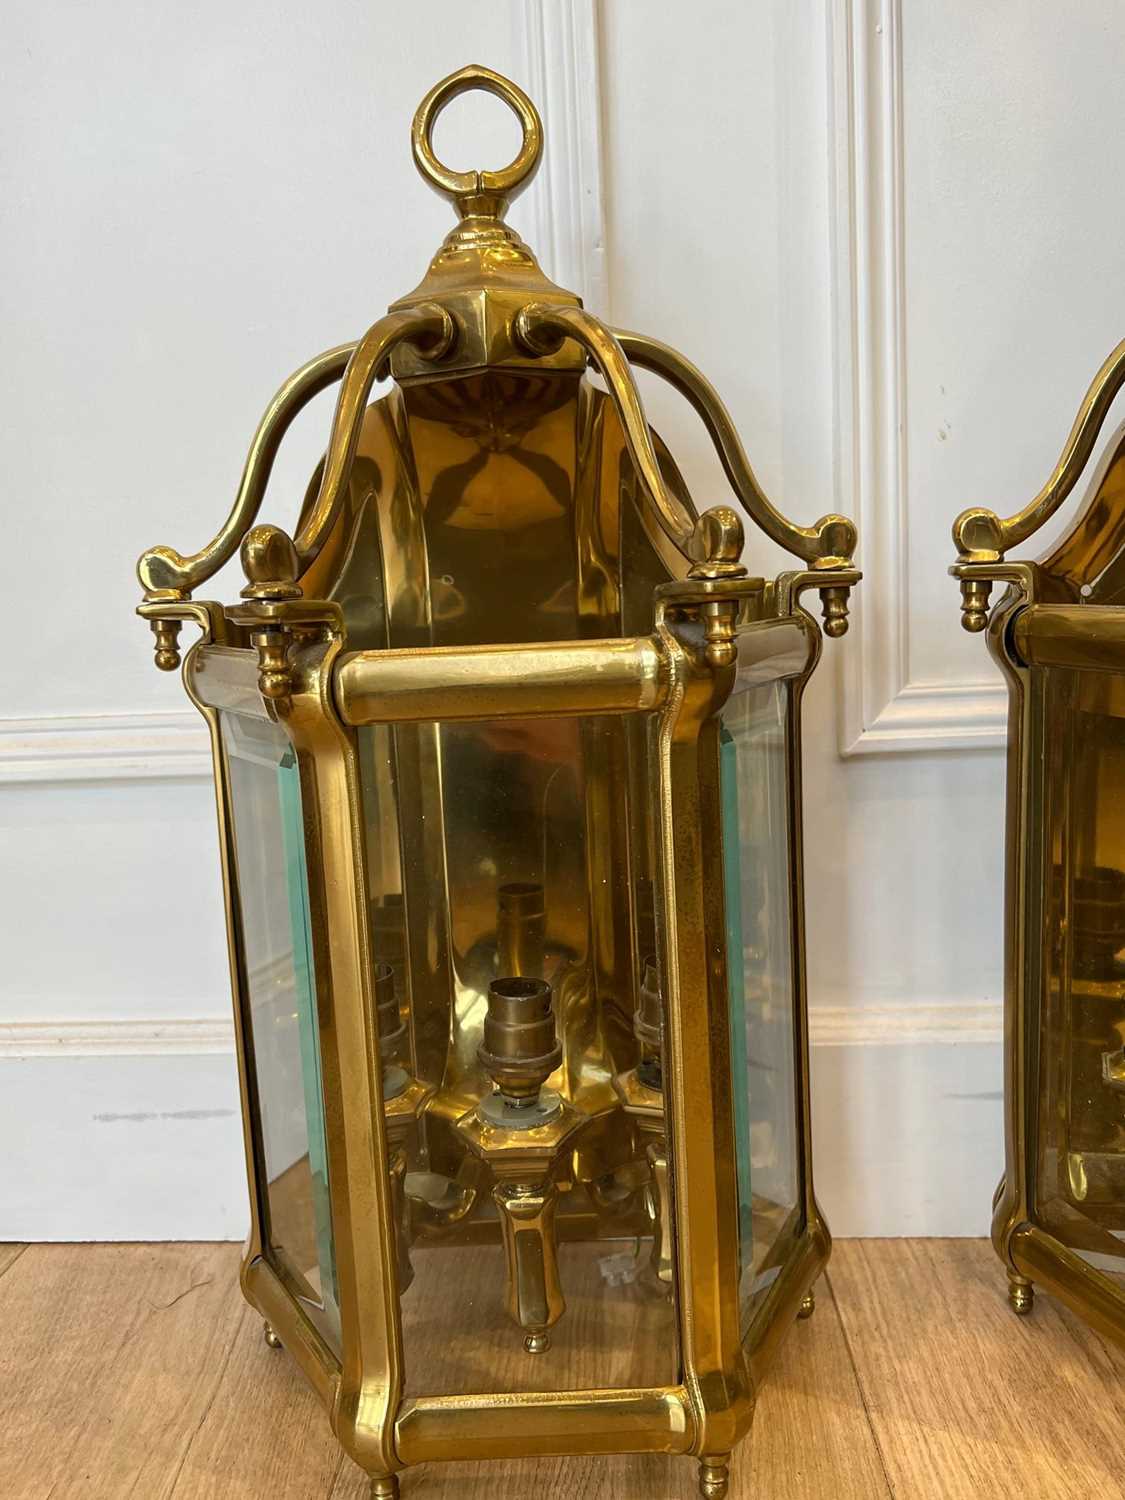 A PAIR OF REGENCY STYLE BRASS HALL LANTERNS - Image 7 of 8